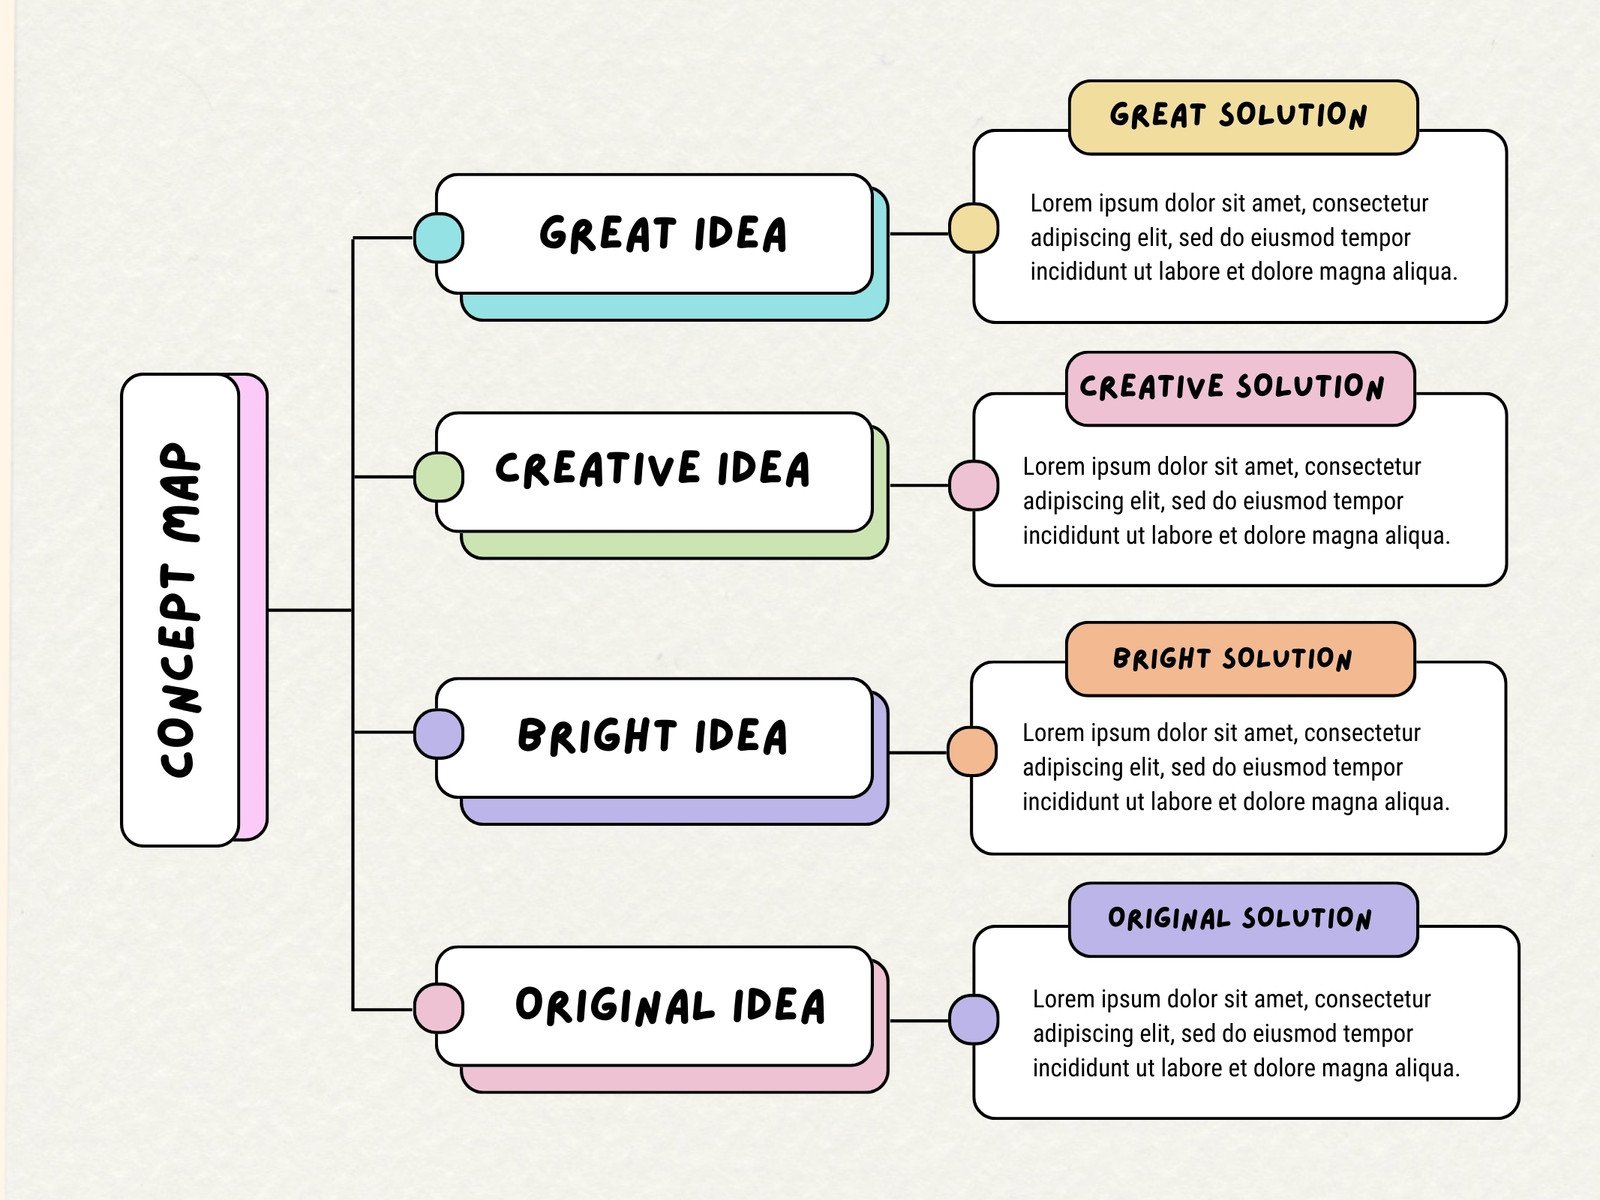 12 Stunning Concept Map Templates to Make Your Own